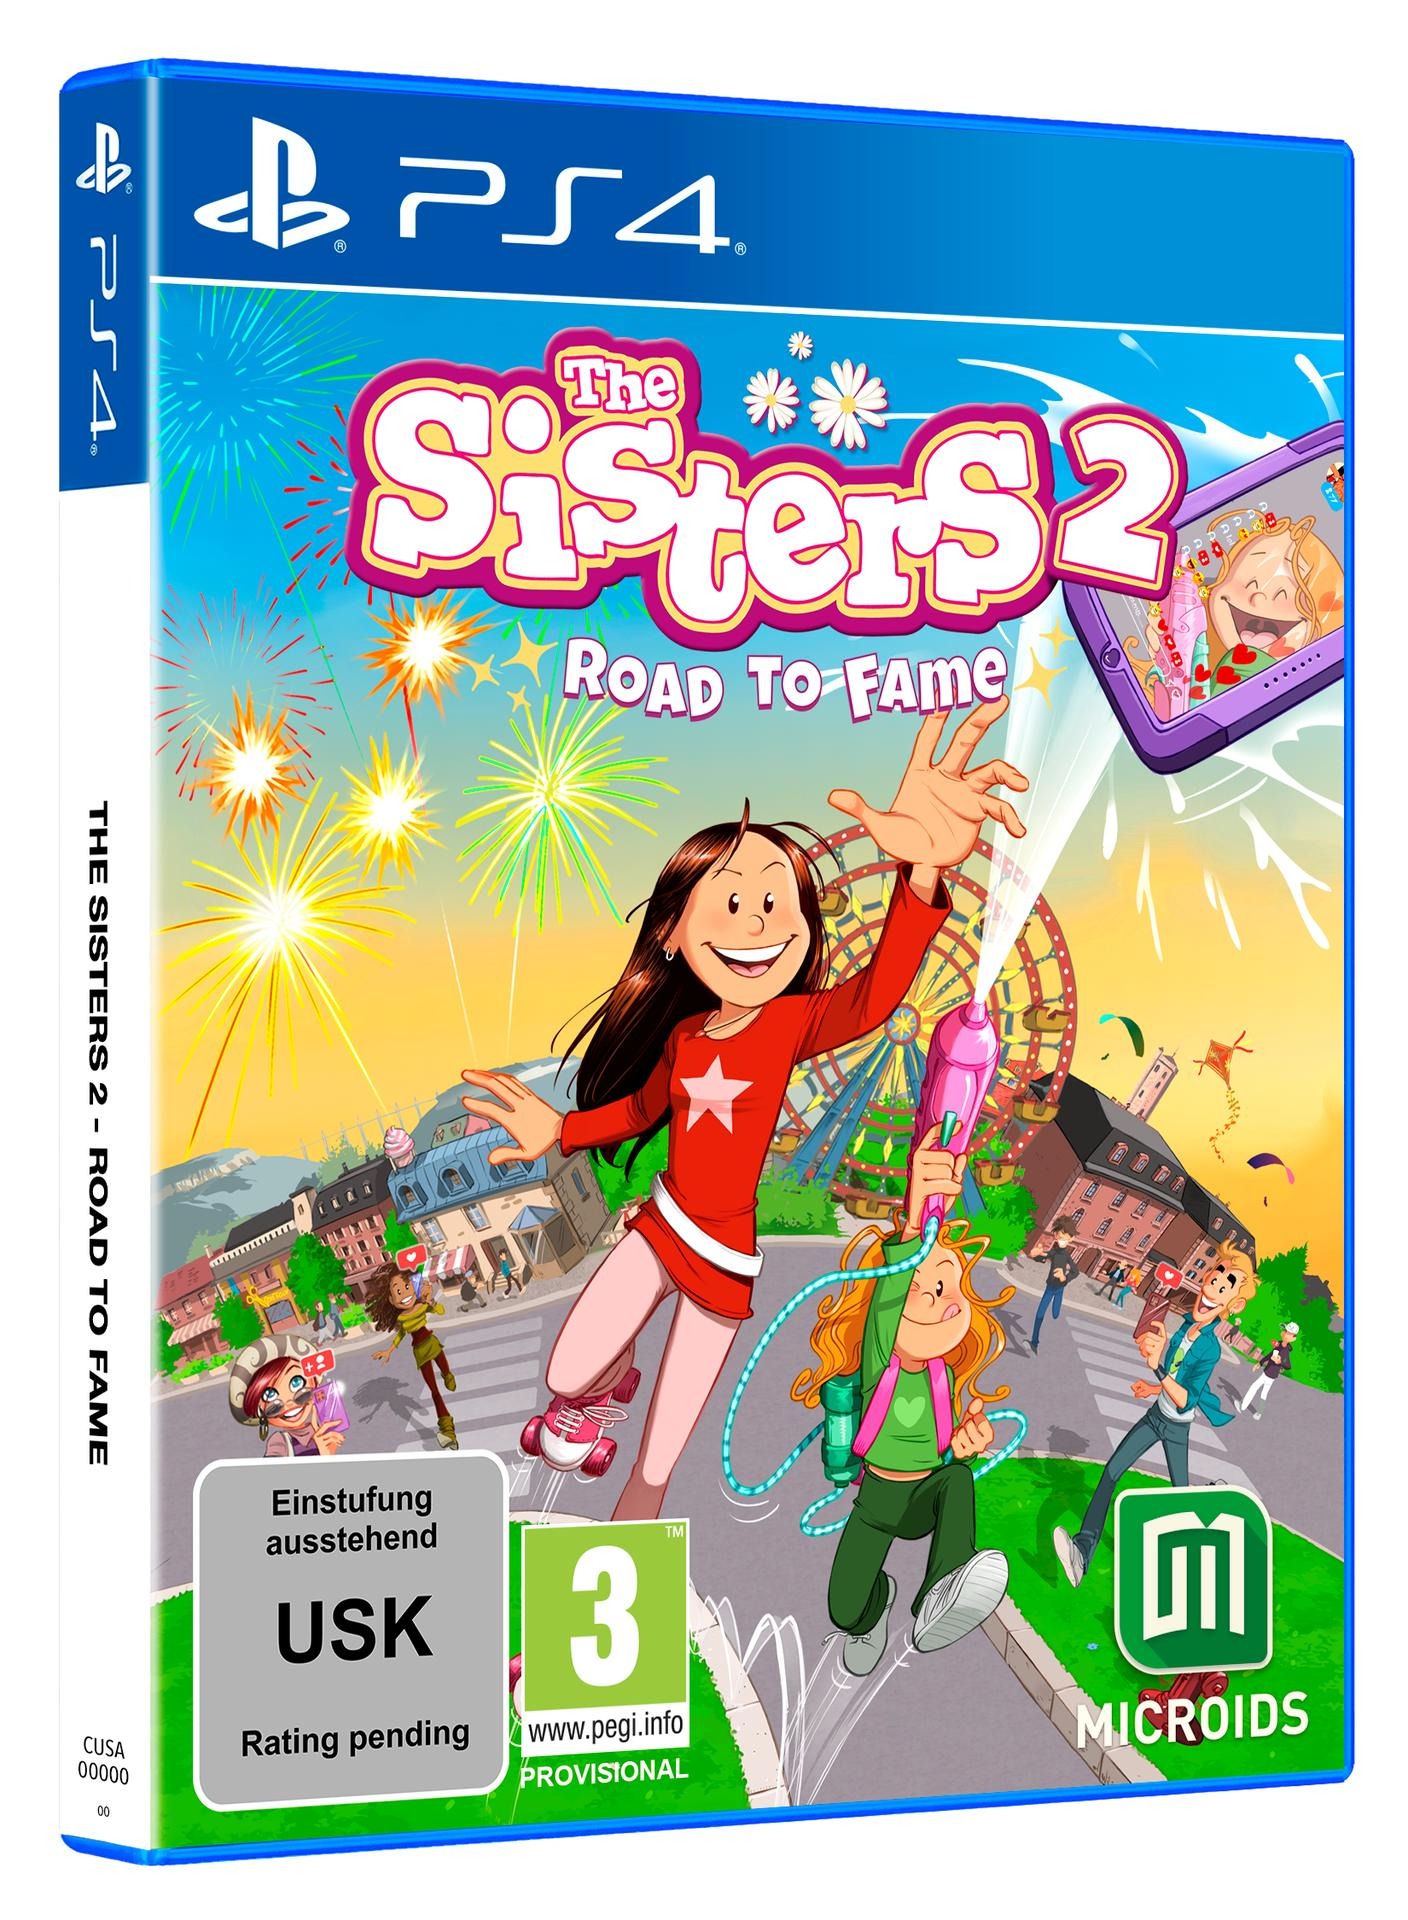 The Sisters 2: Road Fame - 4] to [PlayStation